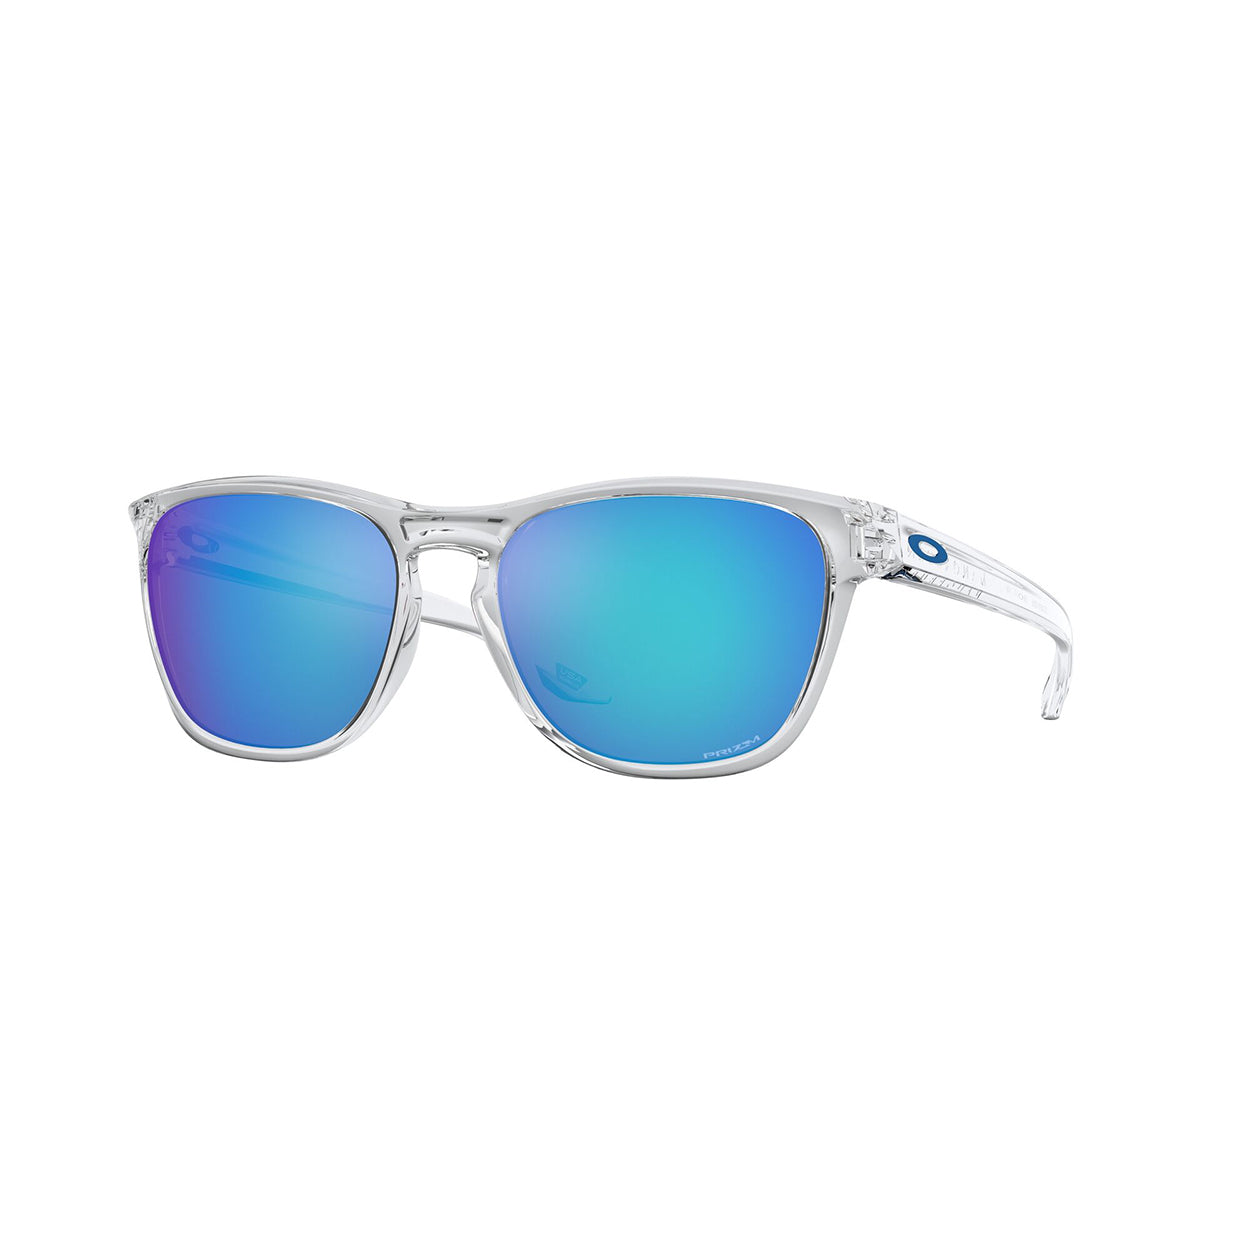 Oakley Manorburn Sunglasses Adult (Polished Clear) Prizm Sapphire Lens